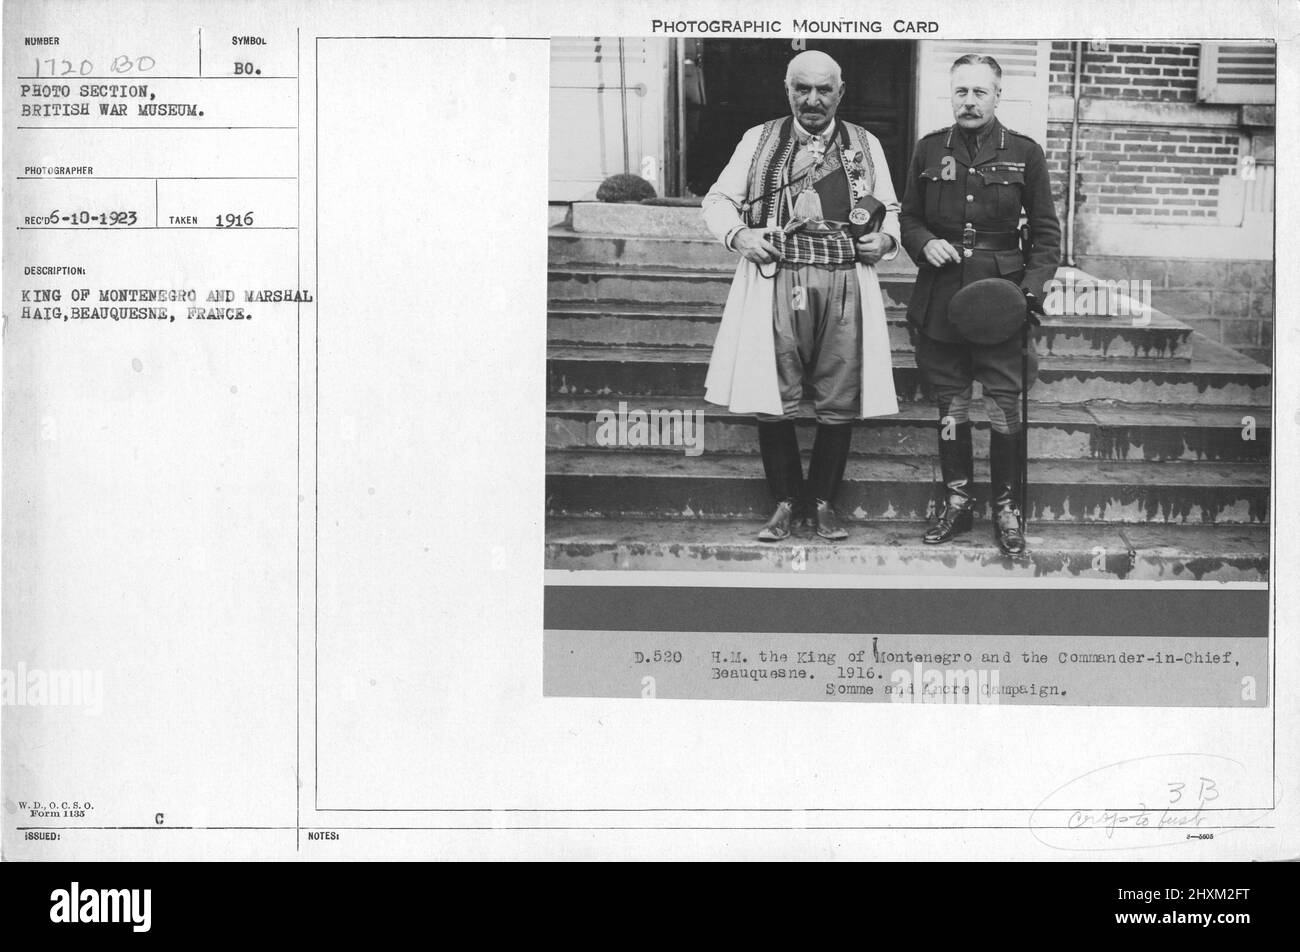 King of Montenegro and Marshal Haig, Beauquesne, France. Collection of World War I Photographs, 1914-1918 that depict the military activities of British and other nation's armed forces and personnel during World War I. Stock Photo